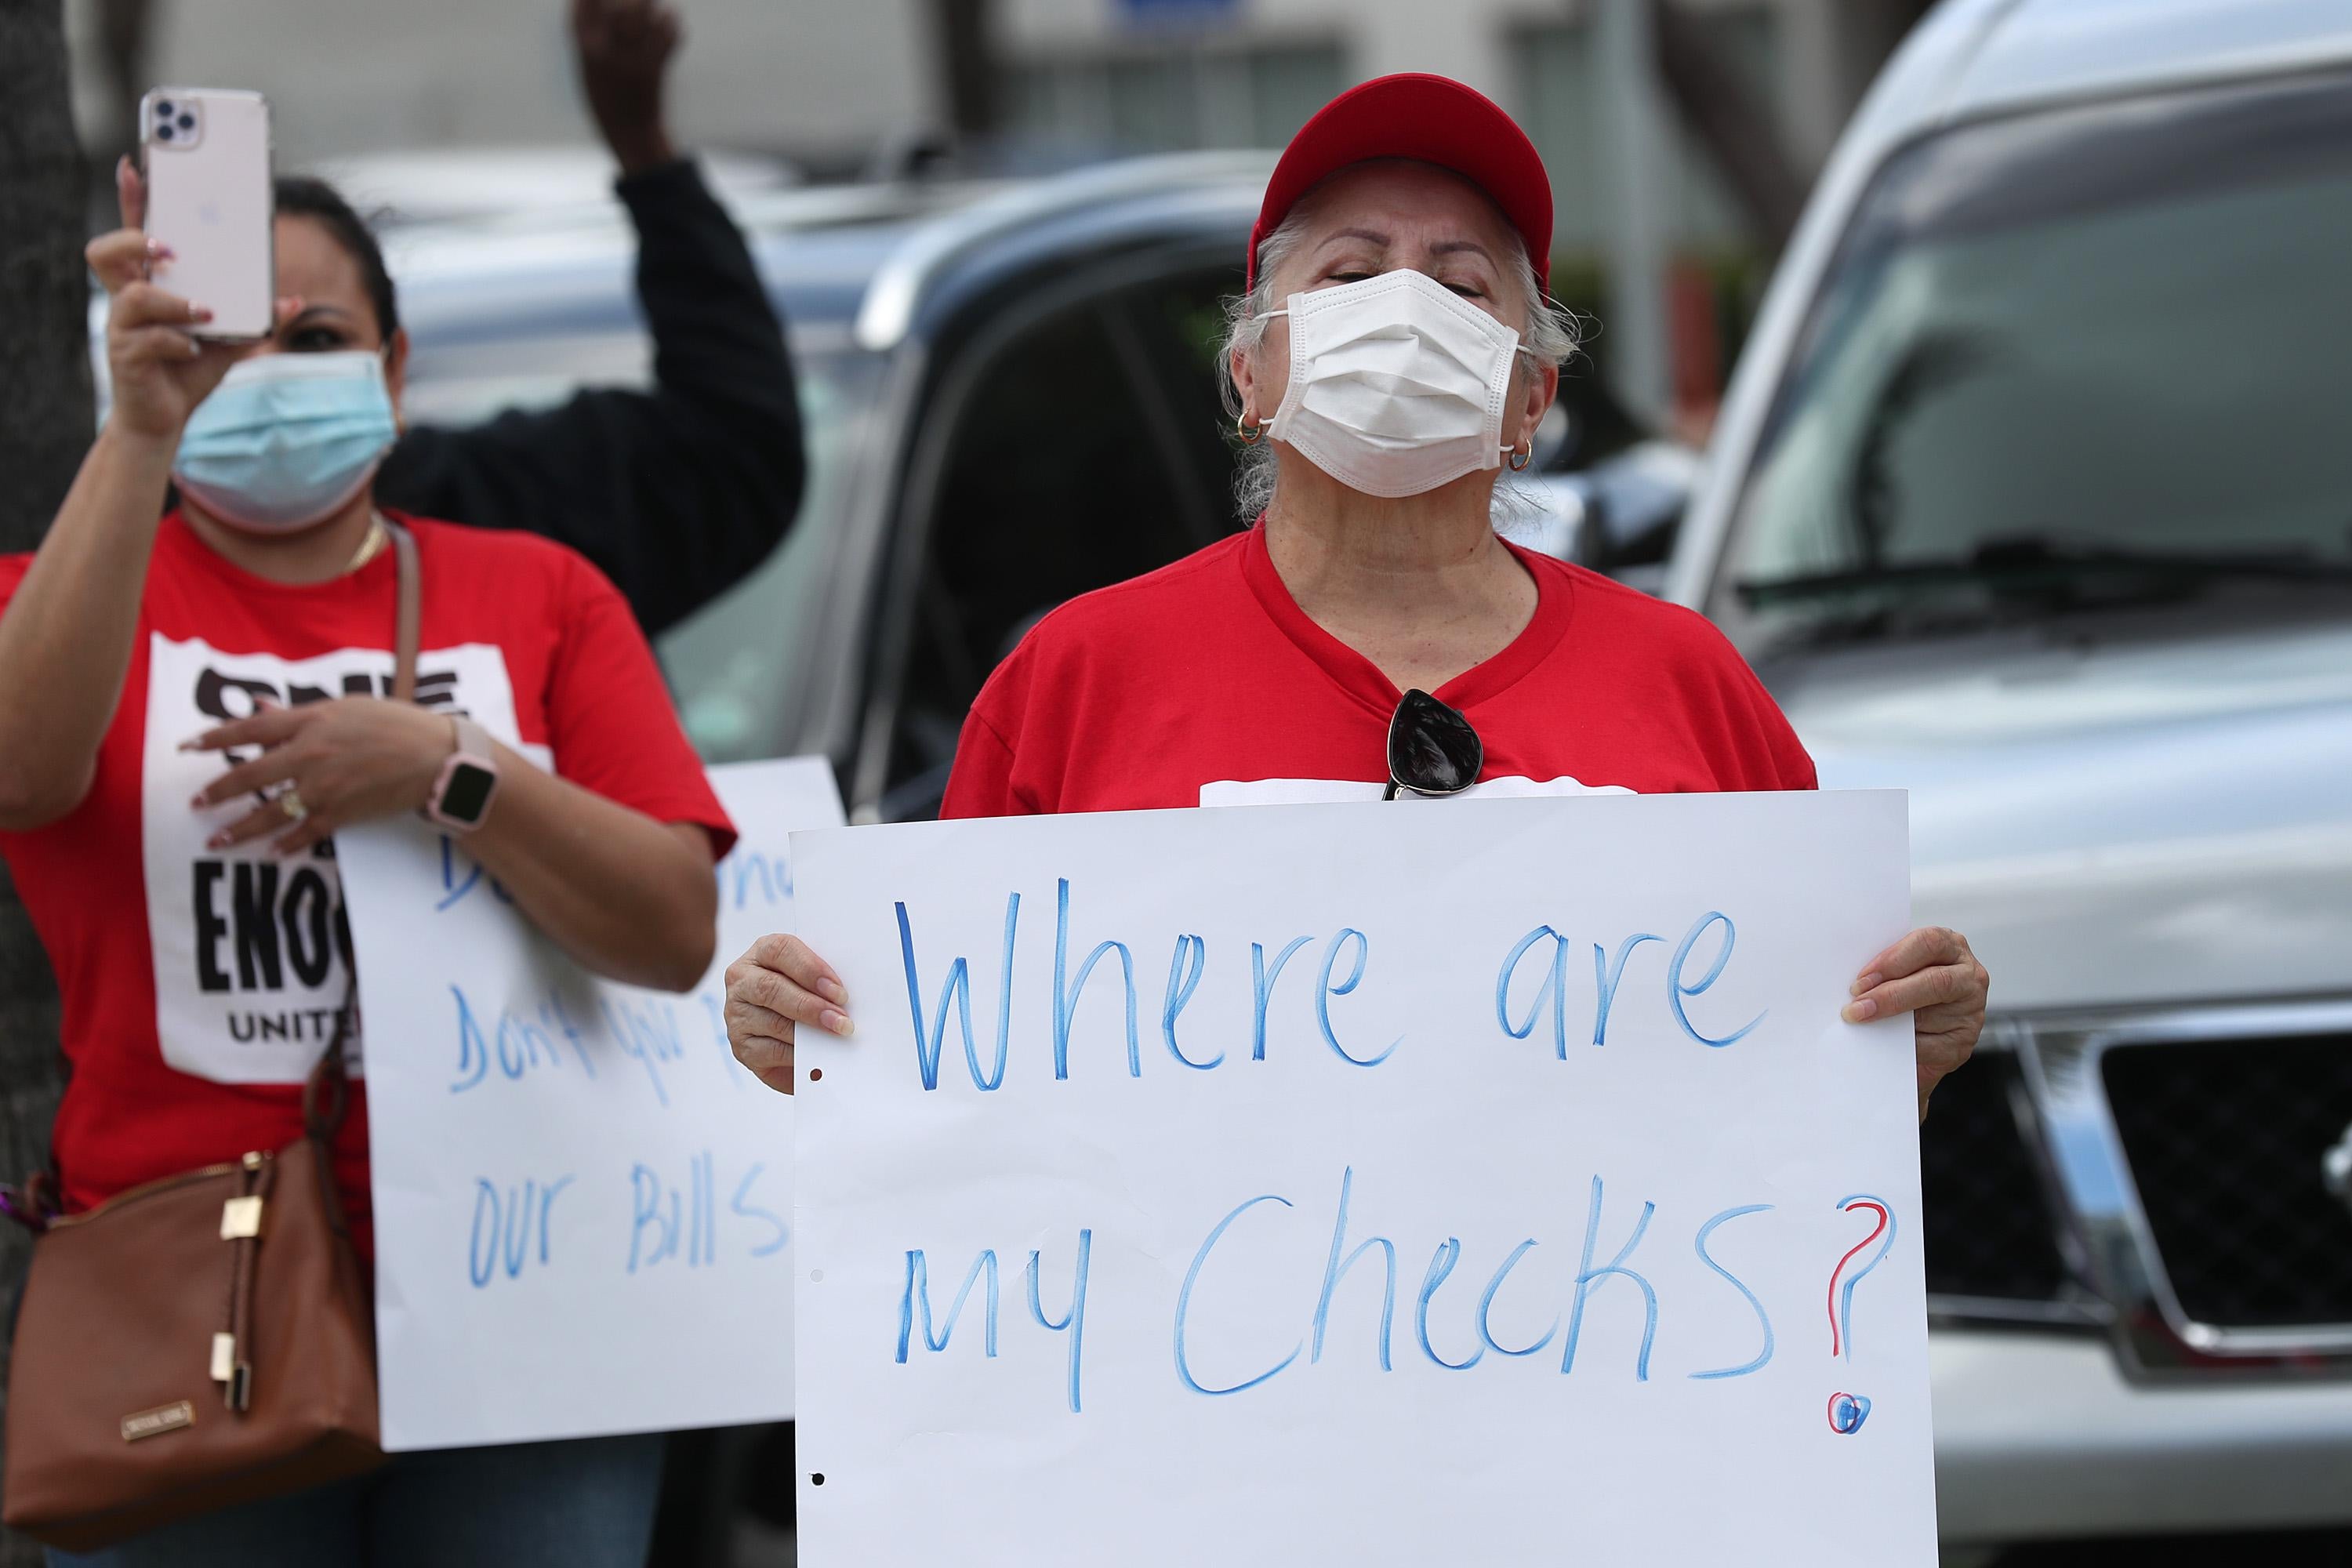 A protester in a face mask holds a sign that says, "Where are my checks?"